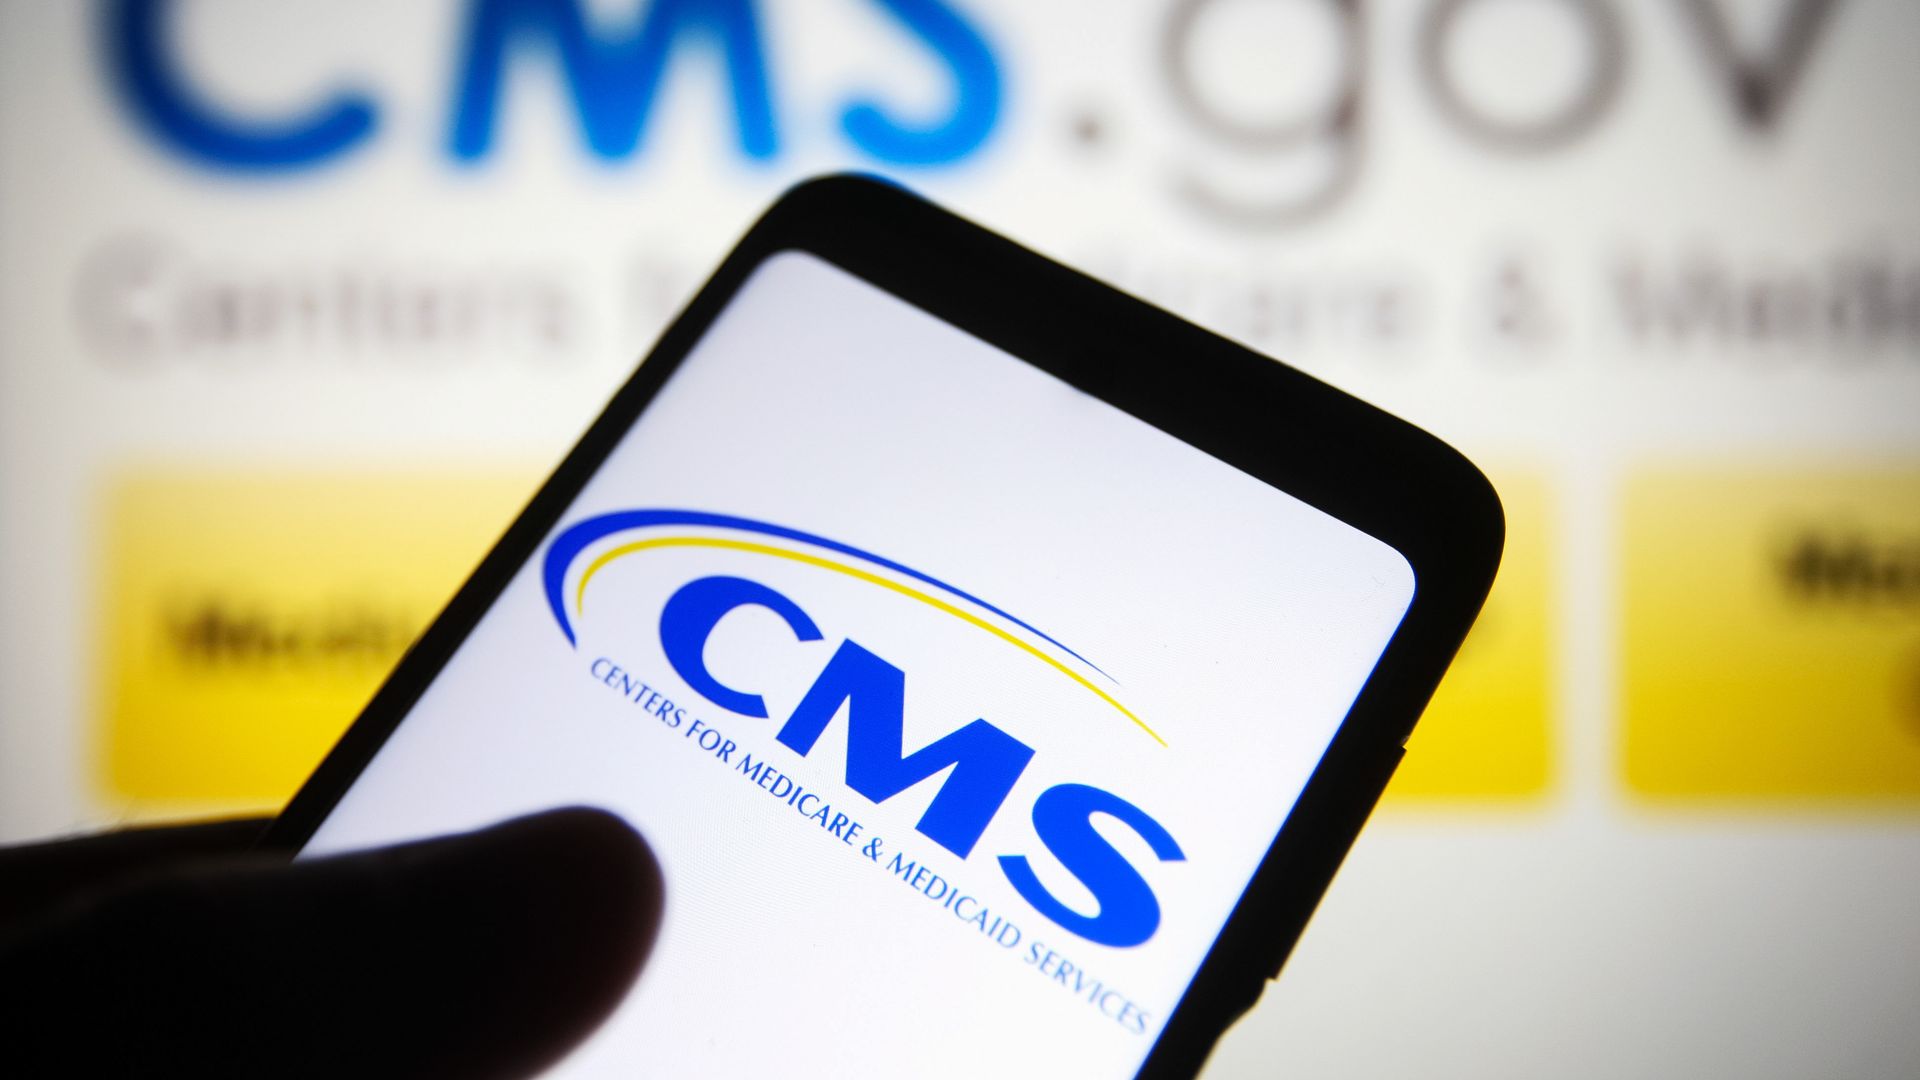 Centers for Medicare & Medicaid Services (CMS) logo is seen displayed on a smartphone and on the background of its website